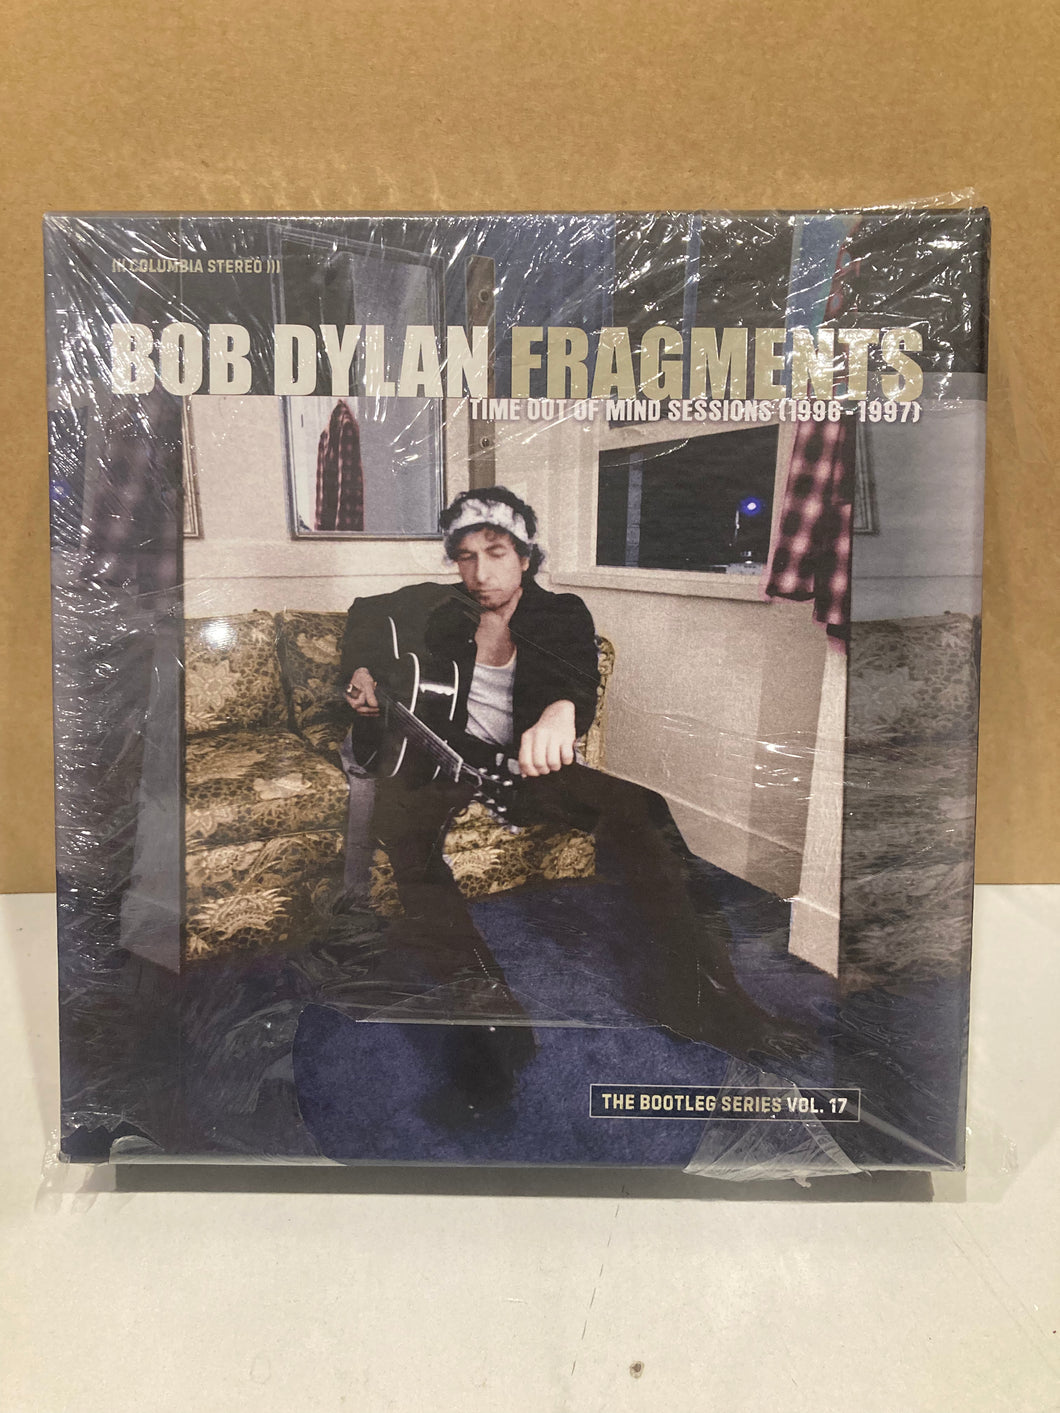 Bob Dylan – Fragments (Time Out Of Mind Sessions (1996-1997)) (The Bootleg Series Vol. 17) Box Set